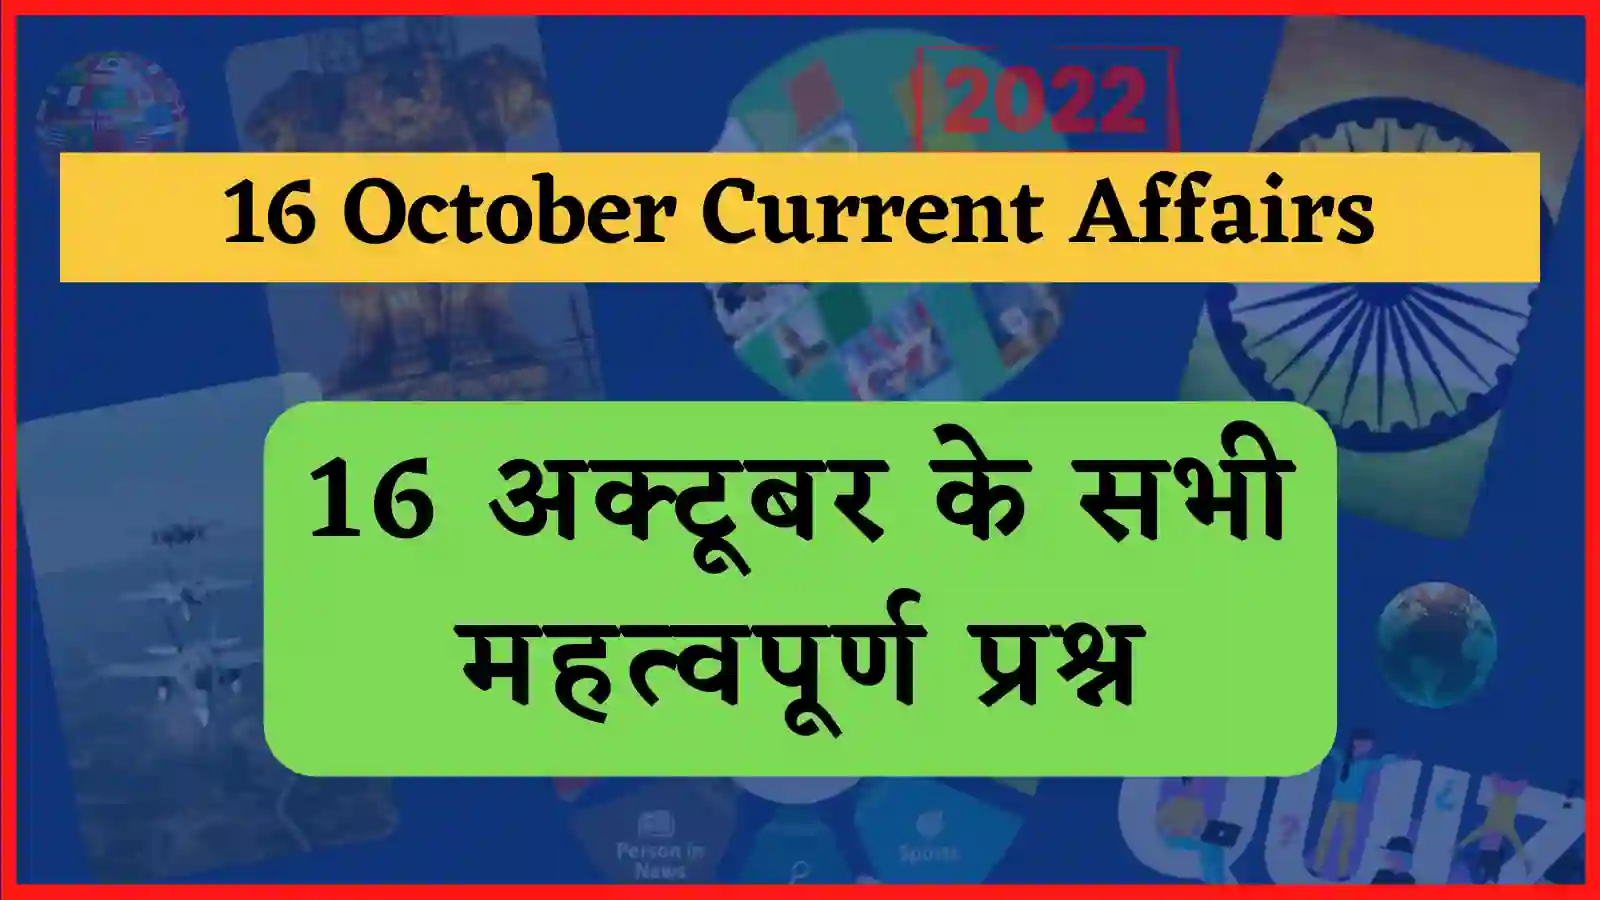 16 October 2022 Current Affairs in Hindi